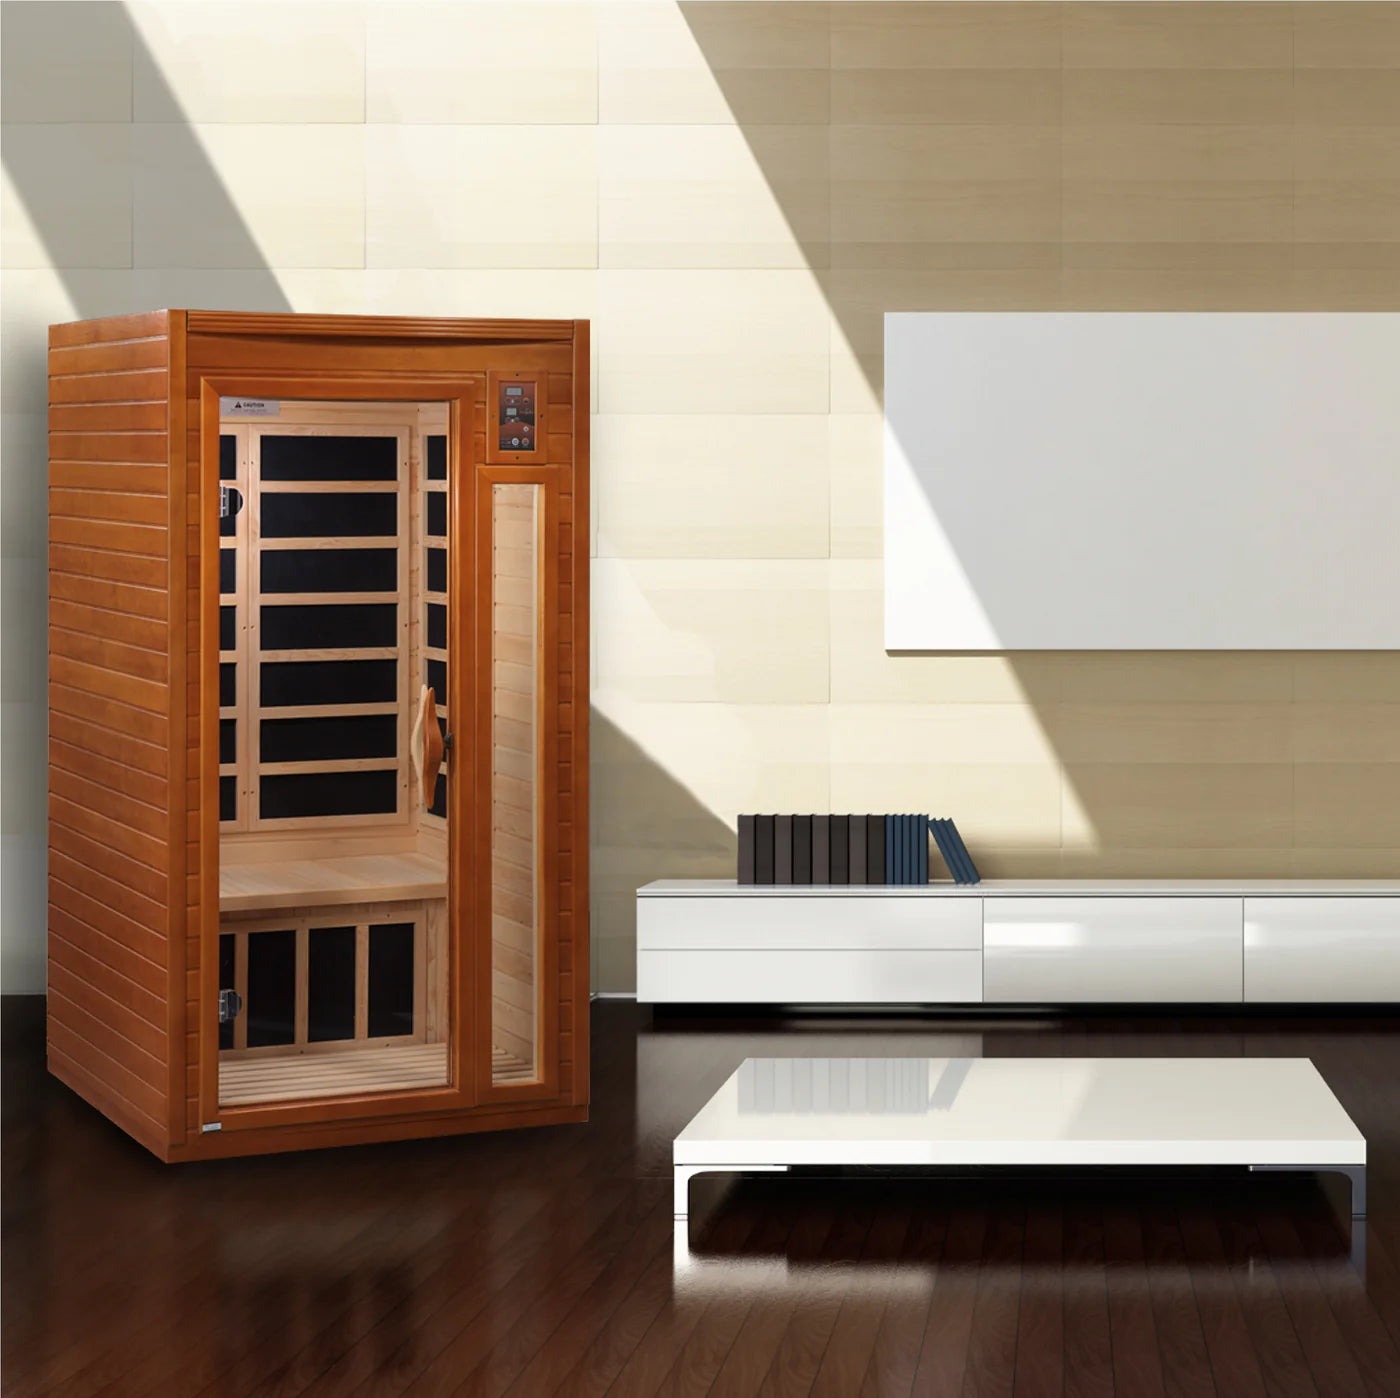 Barcelona 1-2-person Low EMF Infrared Sauna Lifestyle Image